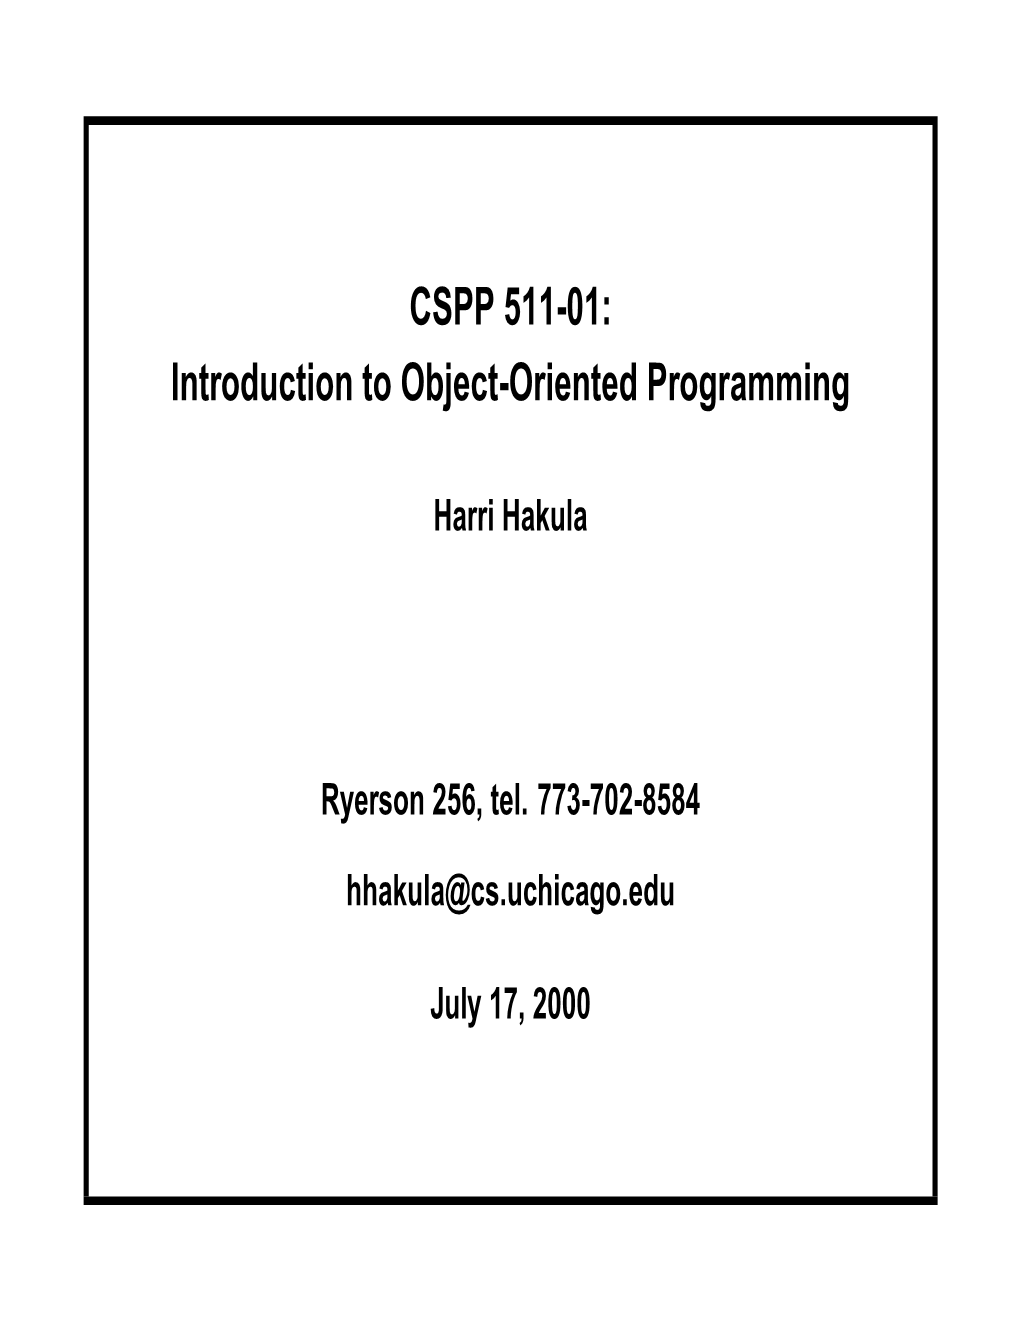 CSPP 511-01: Introduction to Object-Oriented Programming